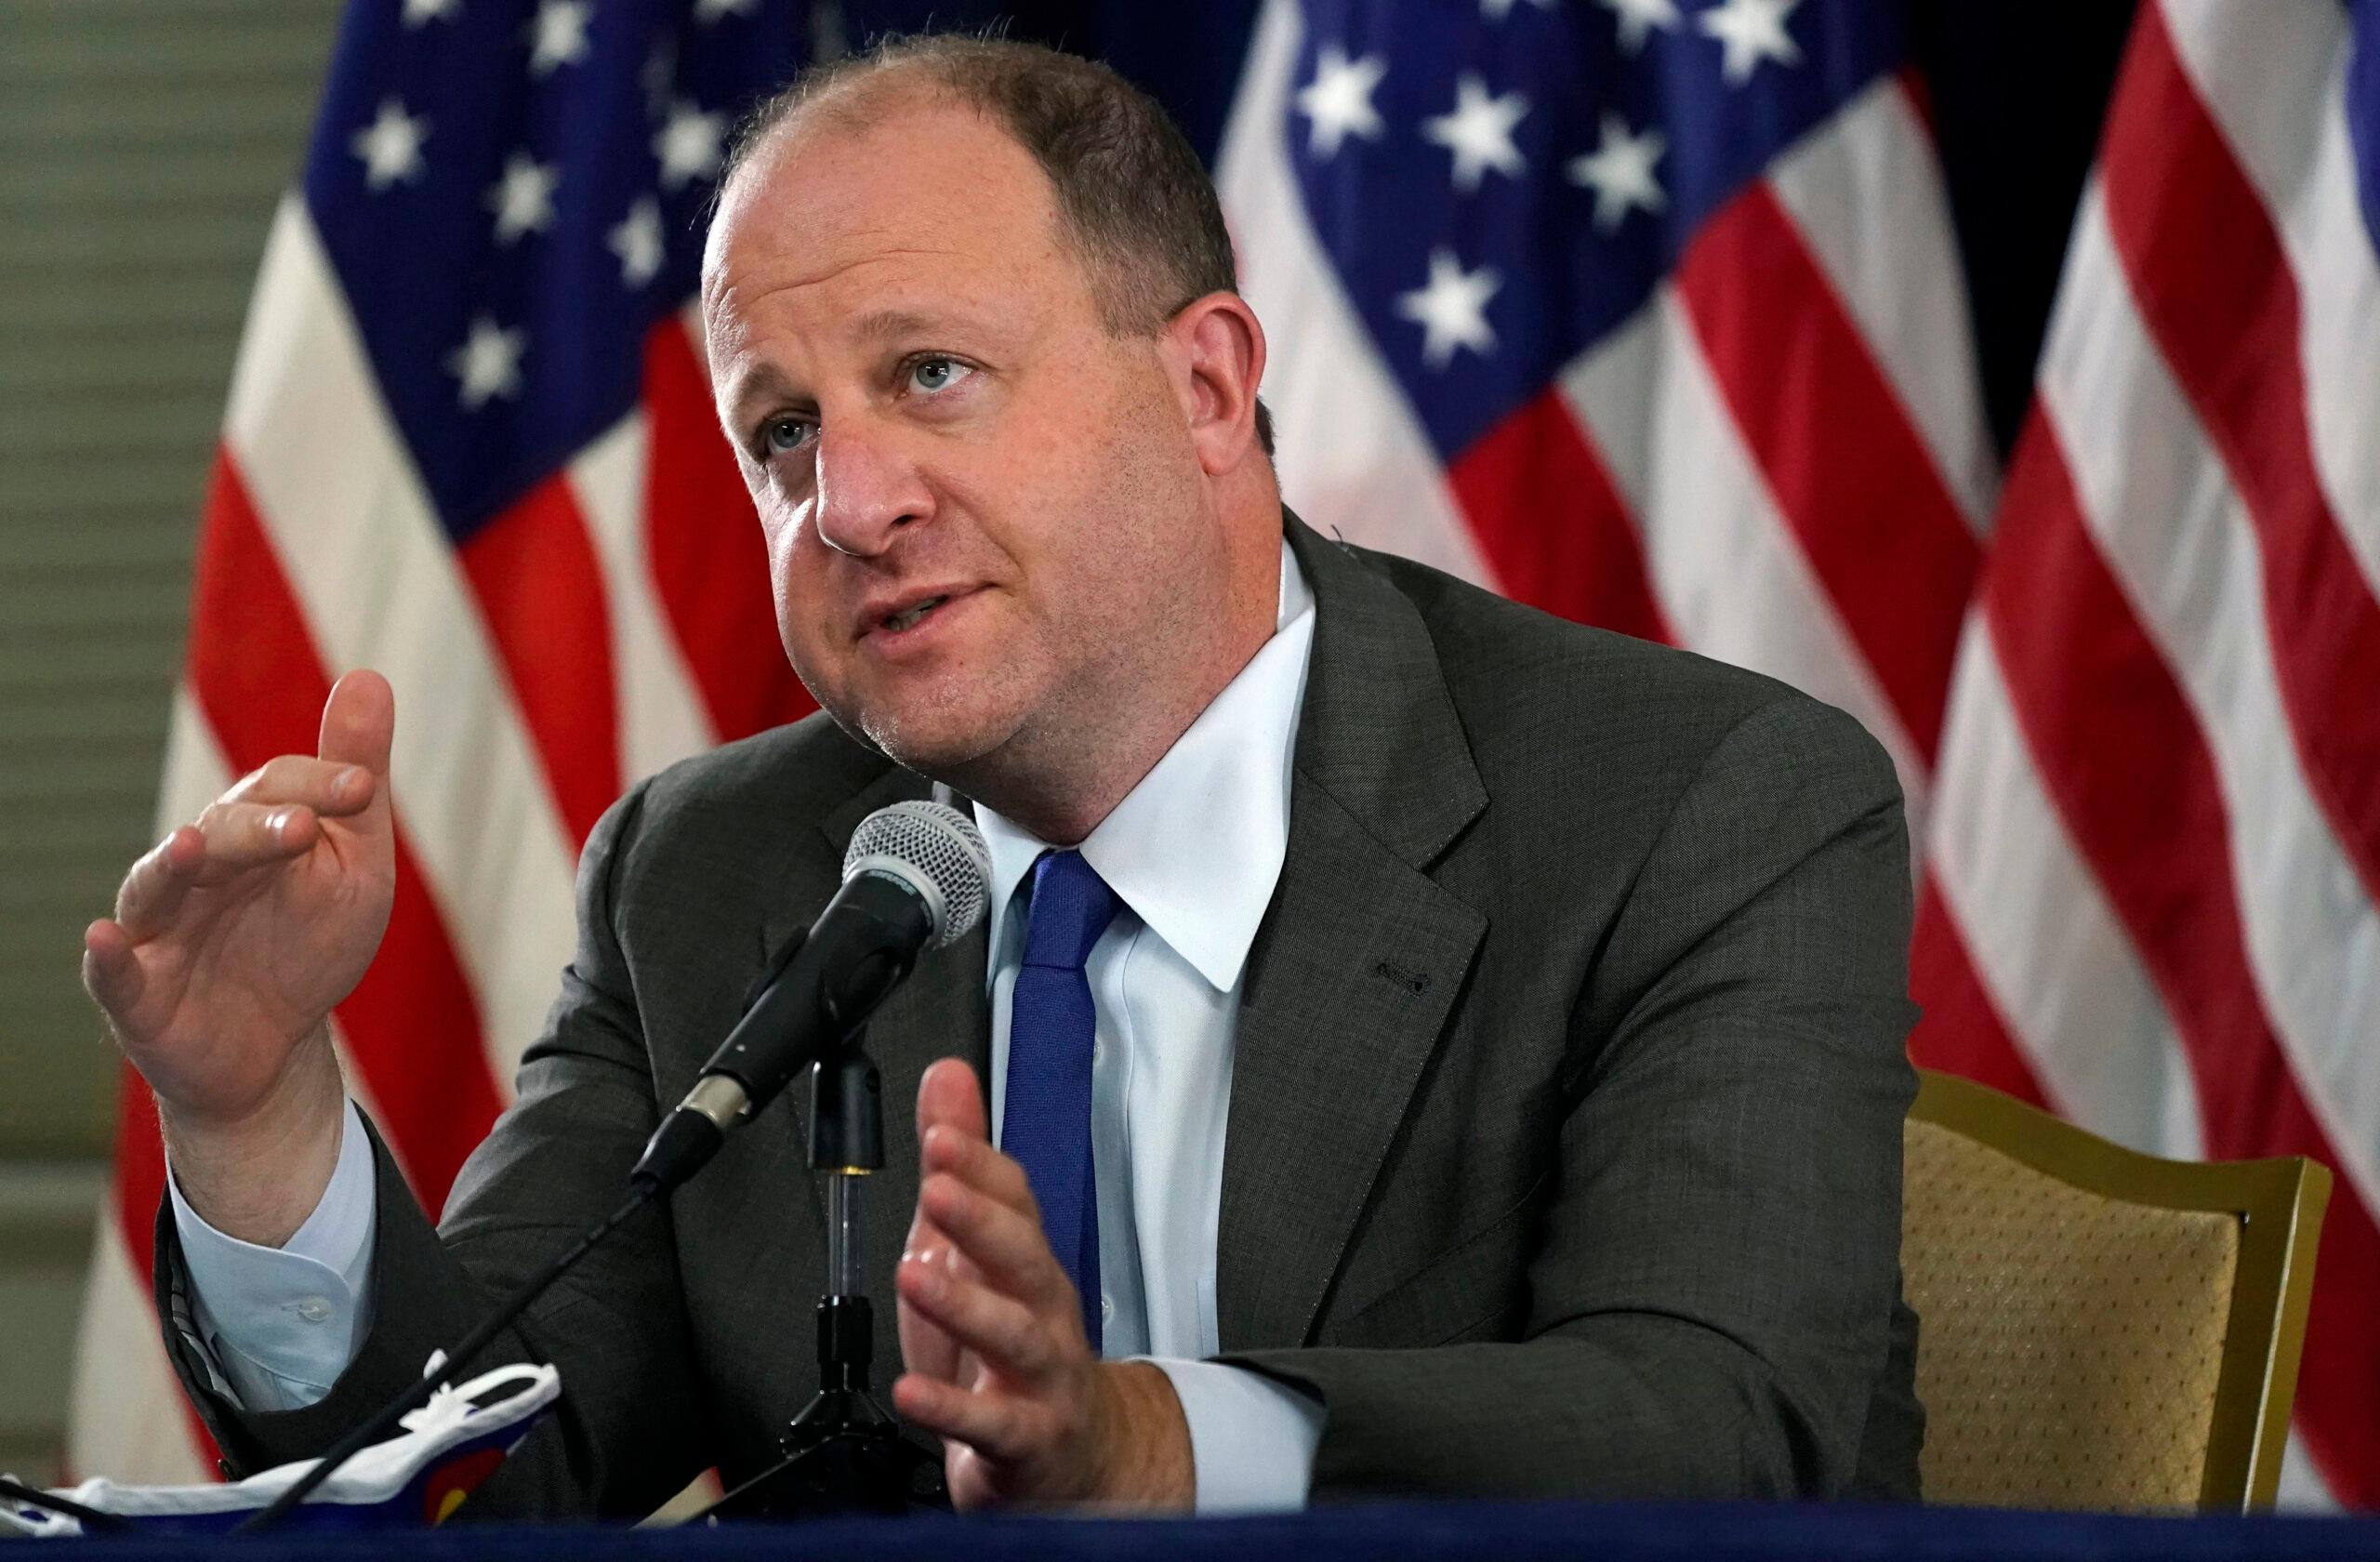 Governor Jared Polis makes a point during a news conference.